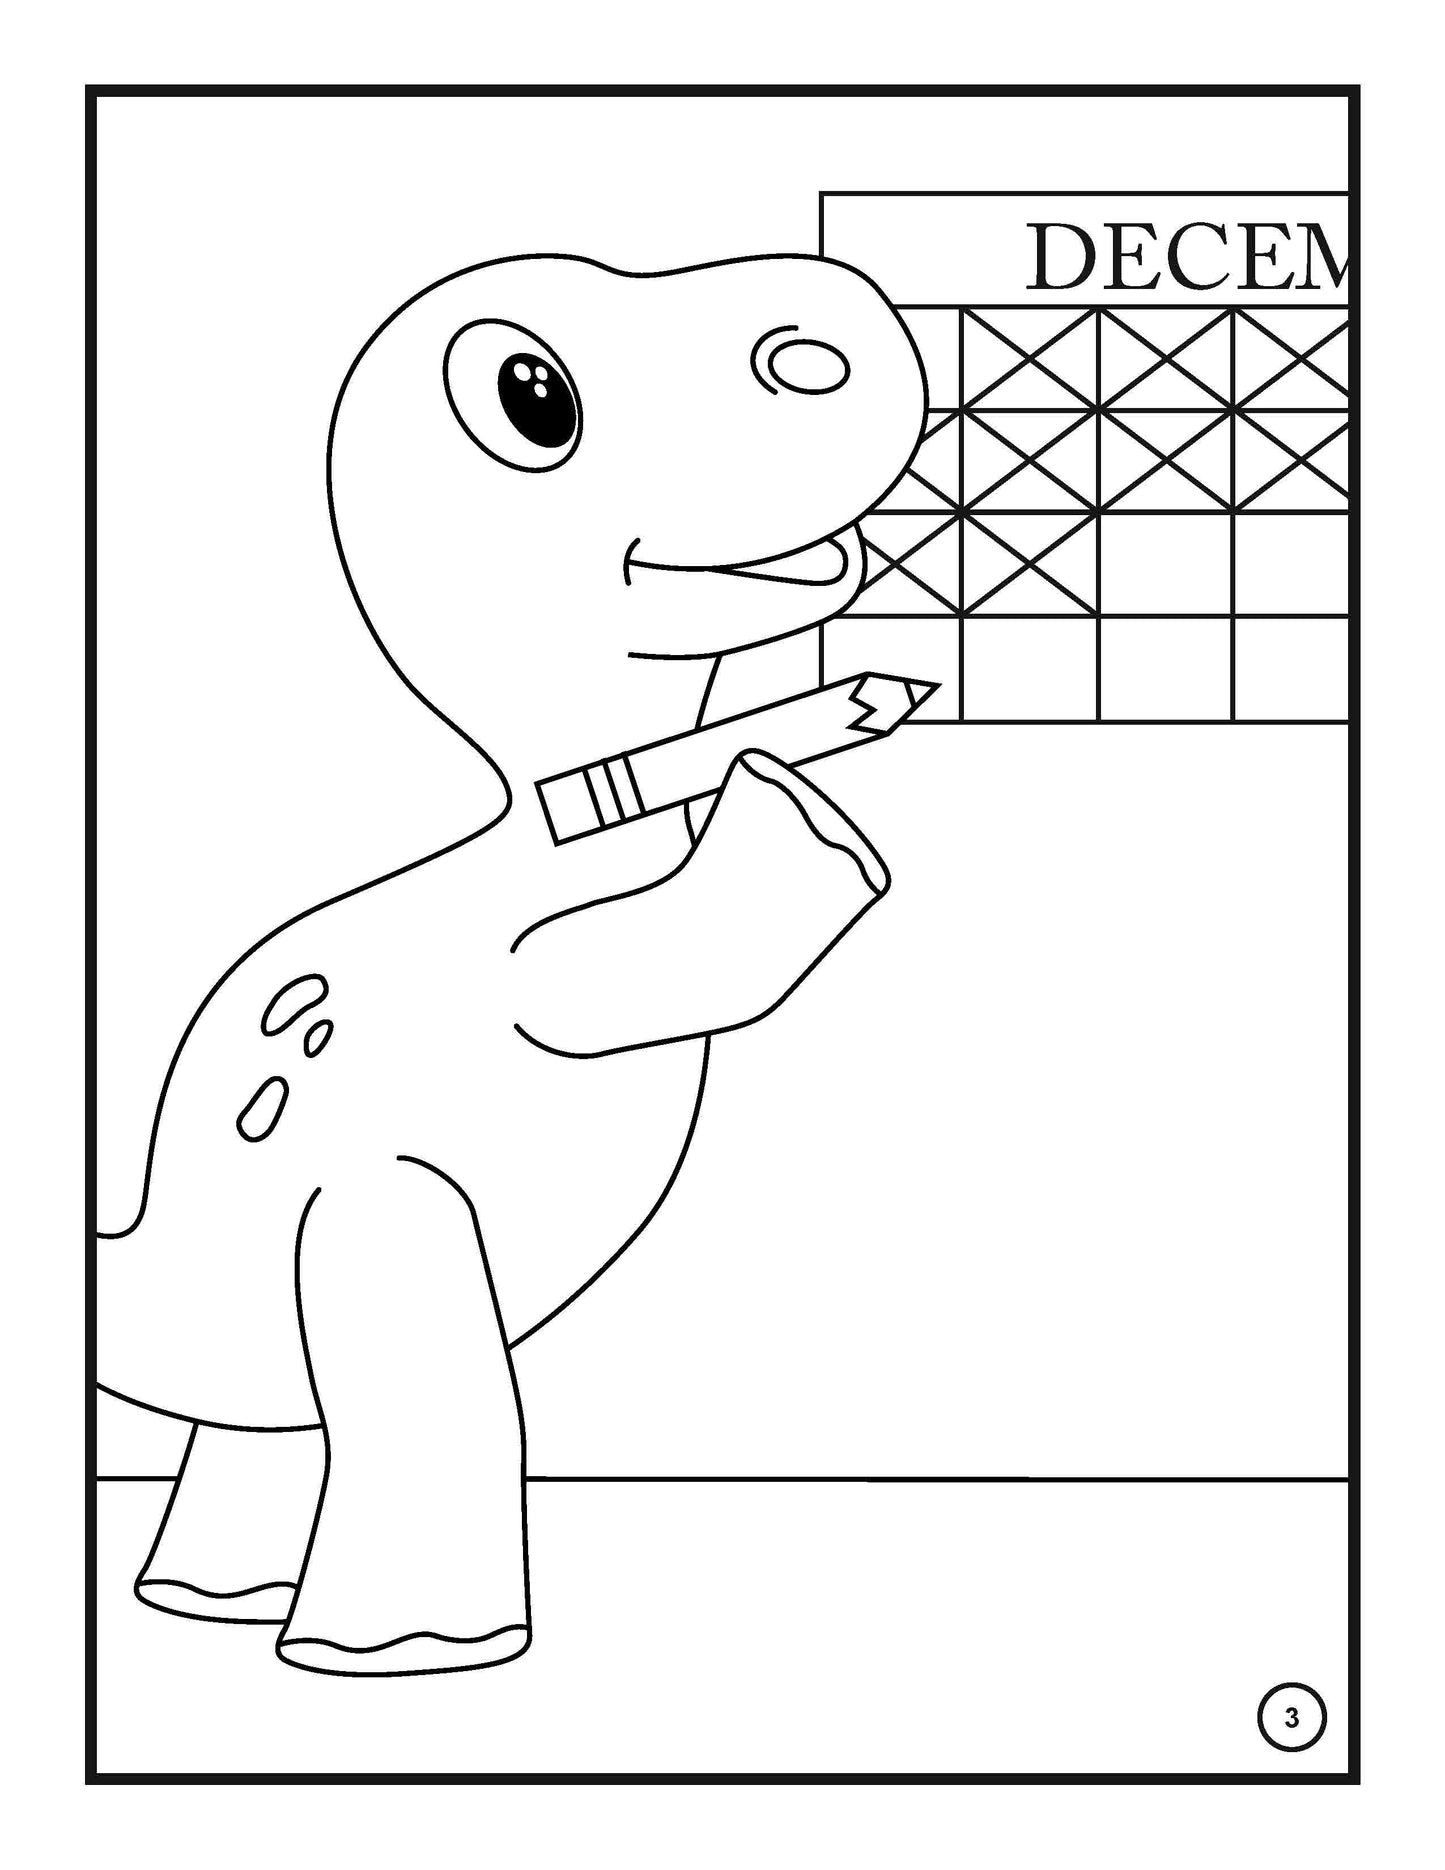 A black and white coloring page featuring a cheerful dinosaur holding a pencil in front of a December advent calendar with empty date boxes, ready to be filled in or colored.